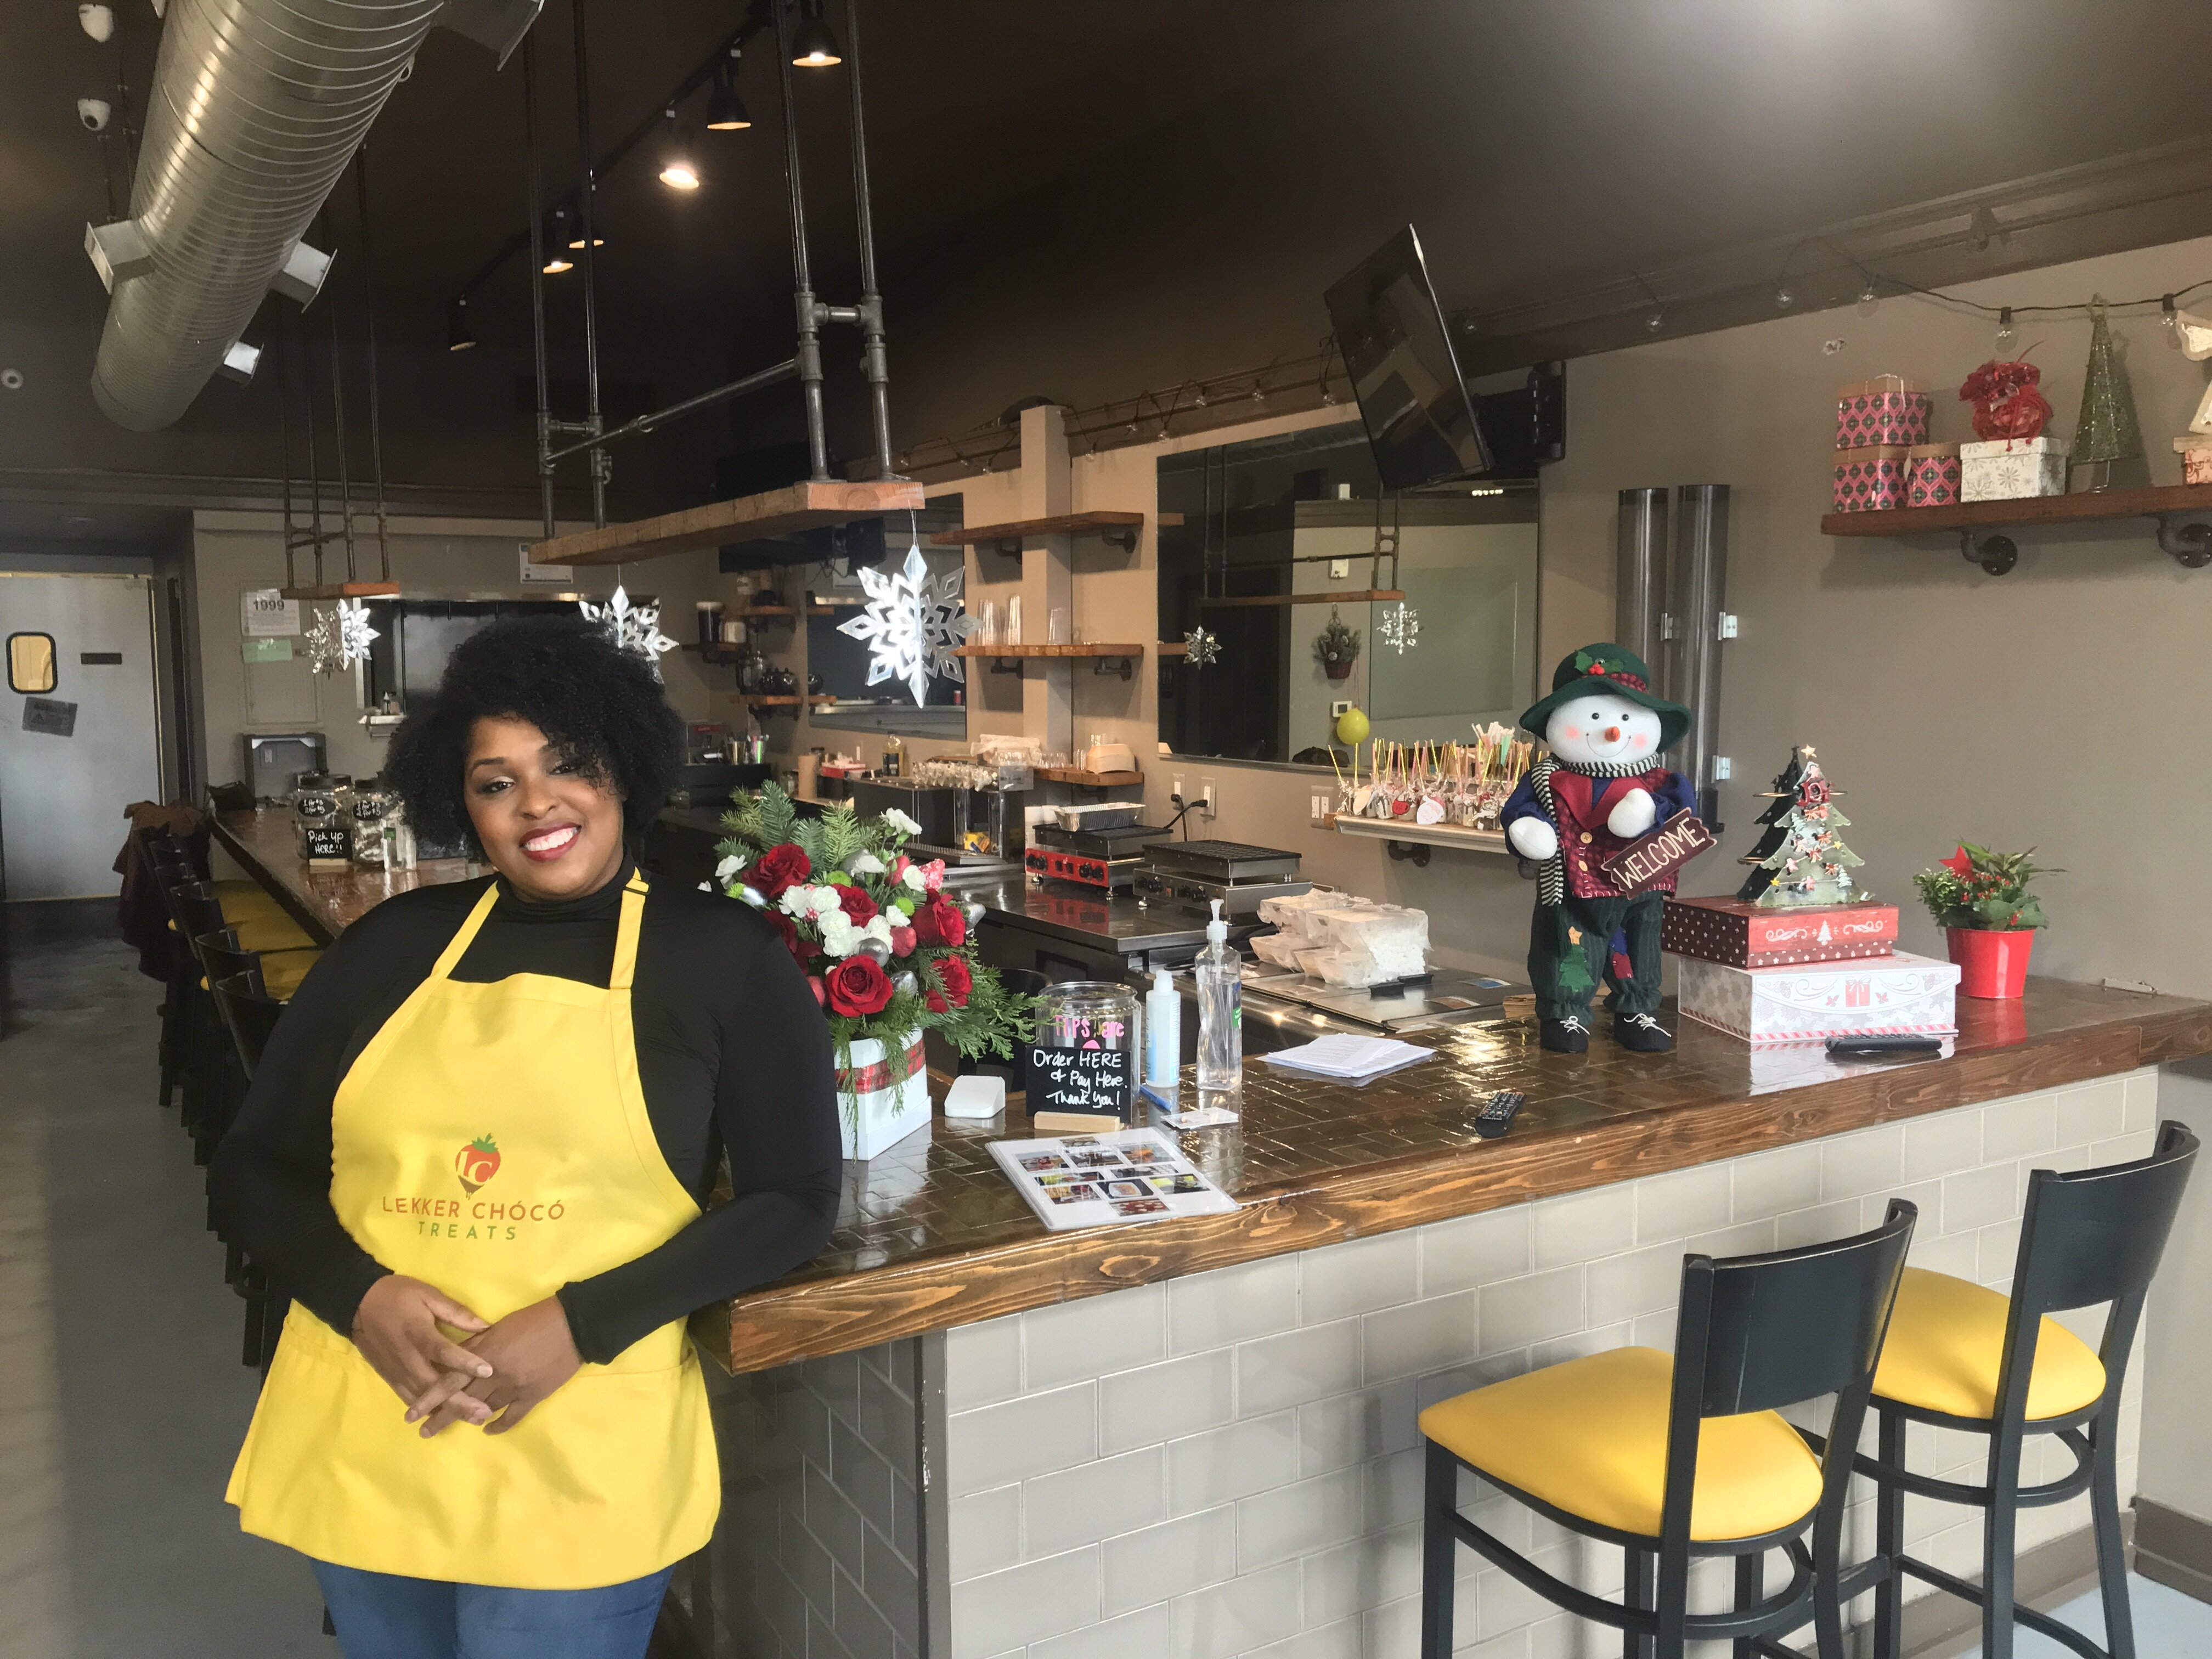 Born in the Caribbean, raised in the Netherlands, and now with a storefront in downtown Farmington, Nakija Mills hopes to establish her business there with a 90-day pop-up shop.